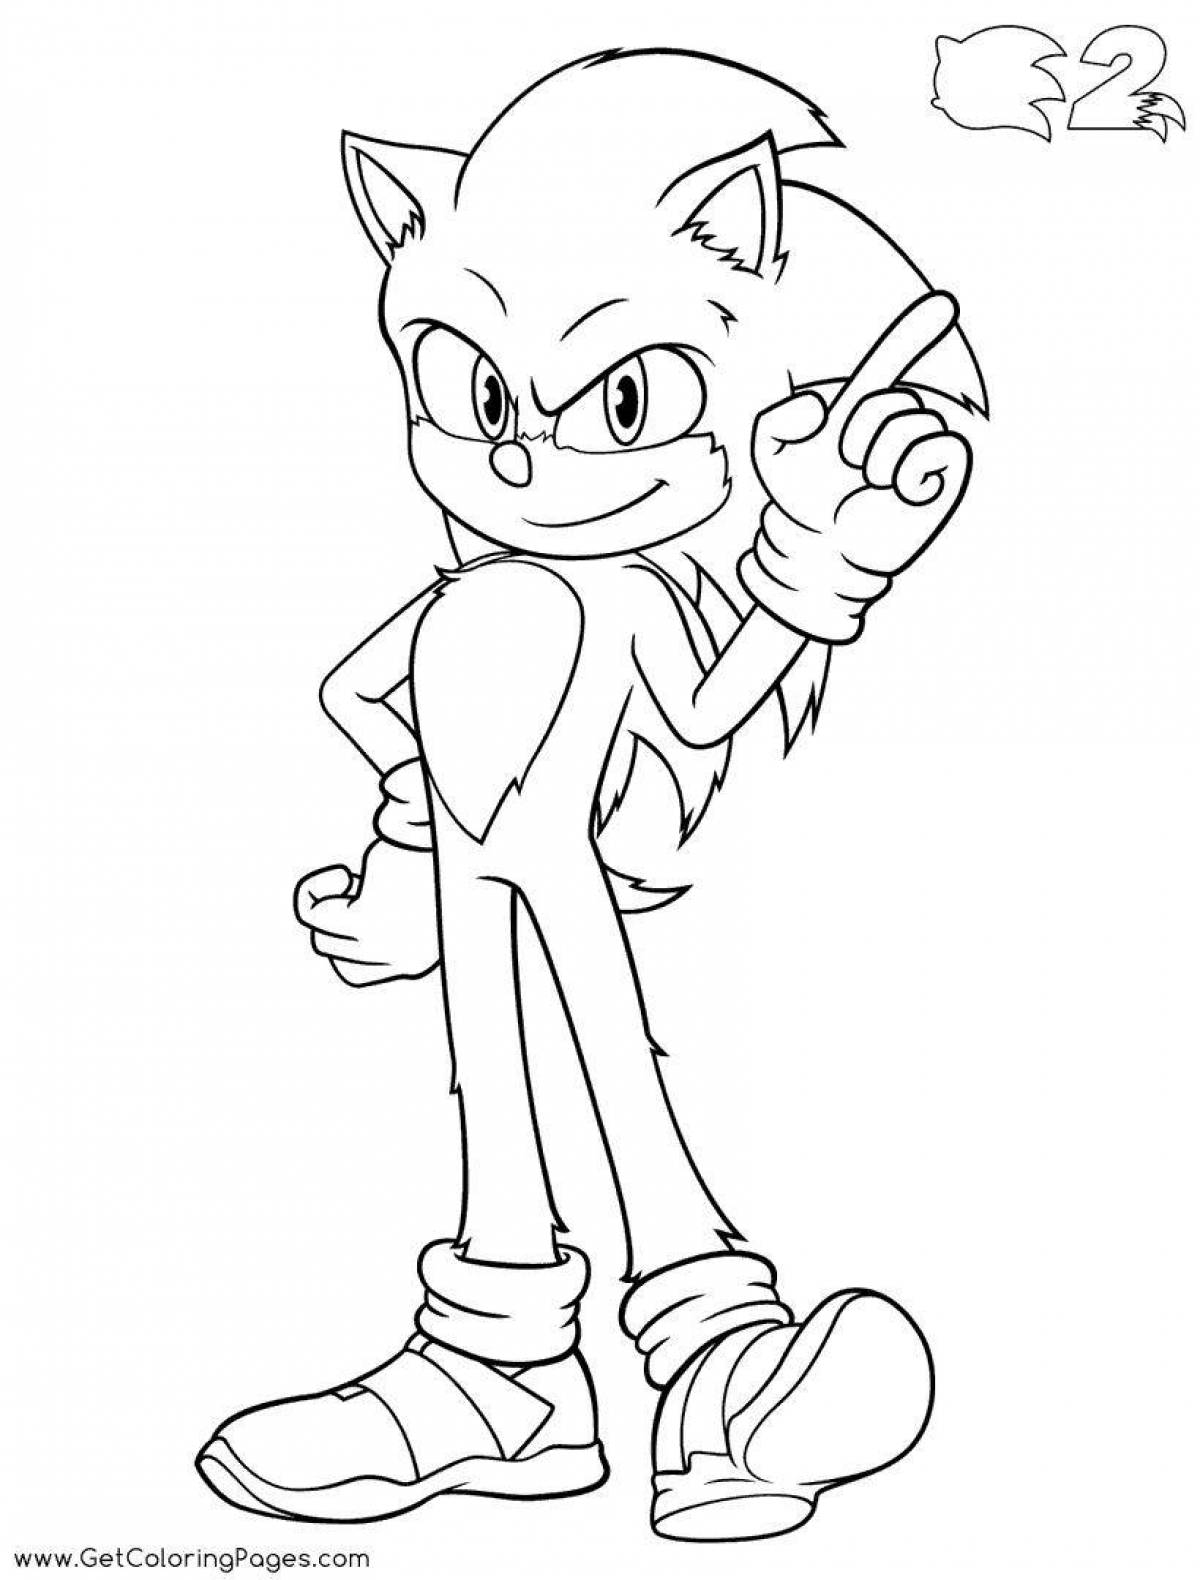 Awesome sonic monster coloring book